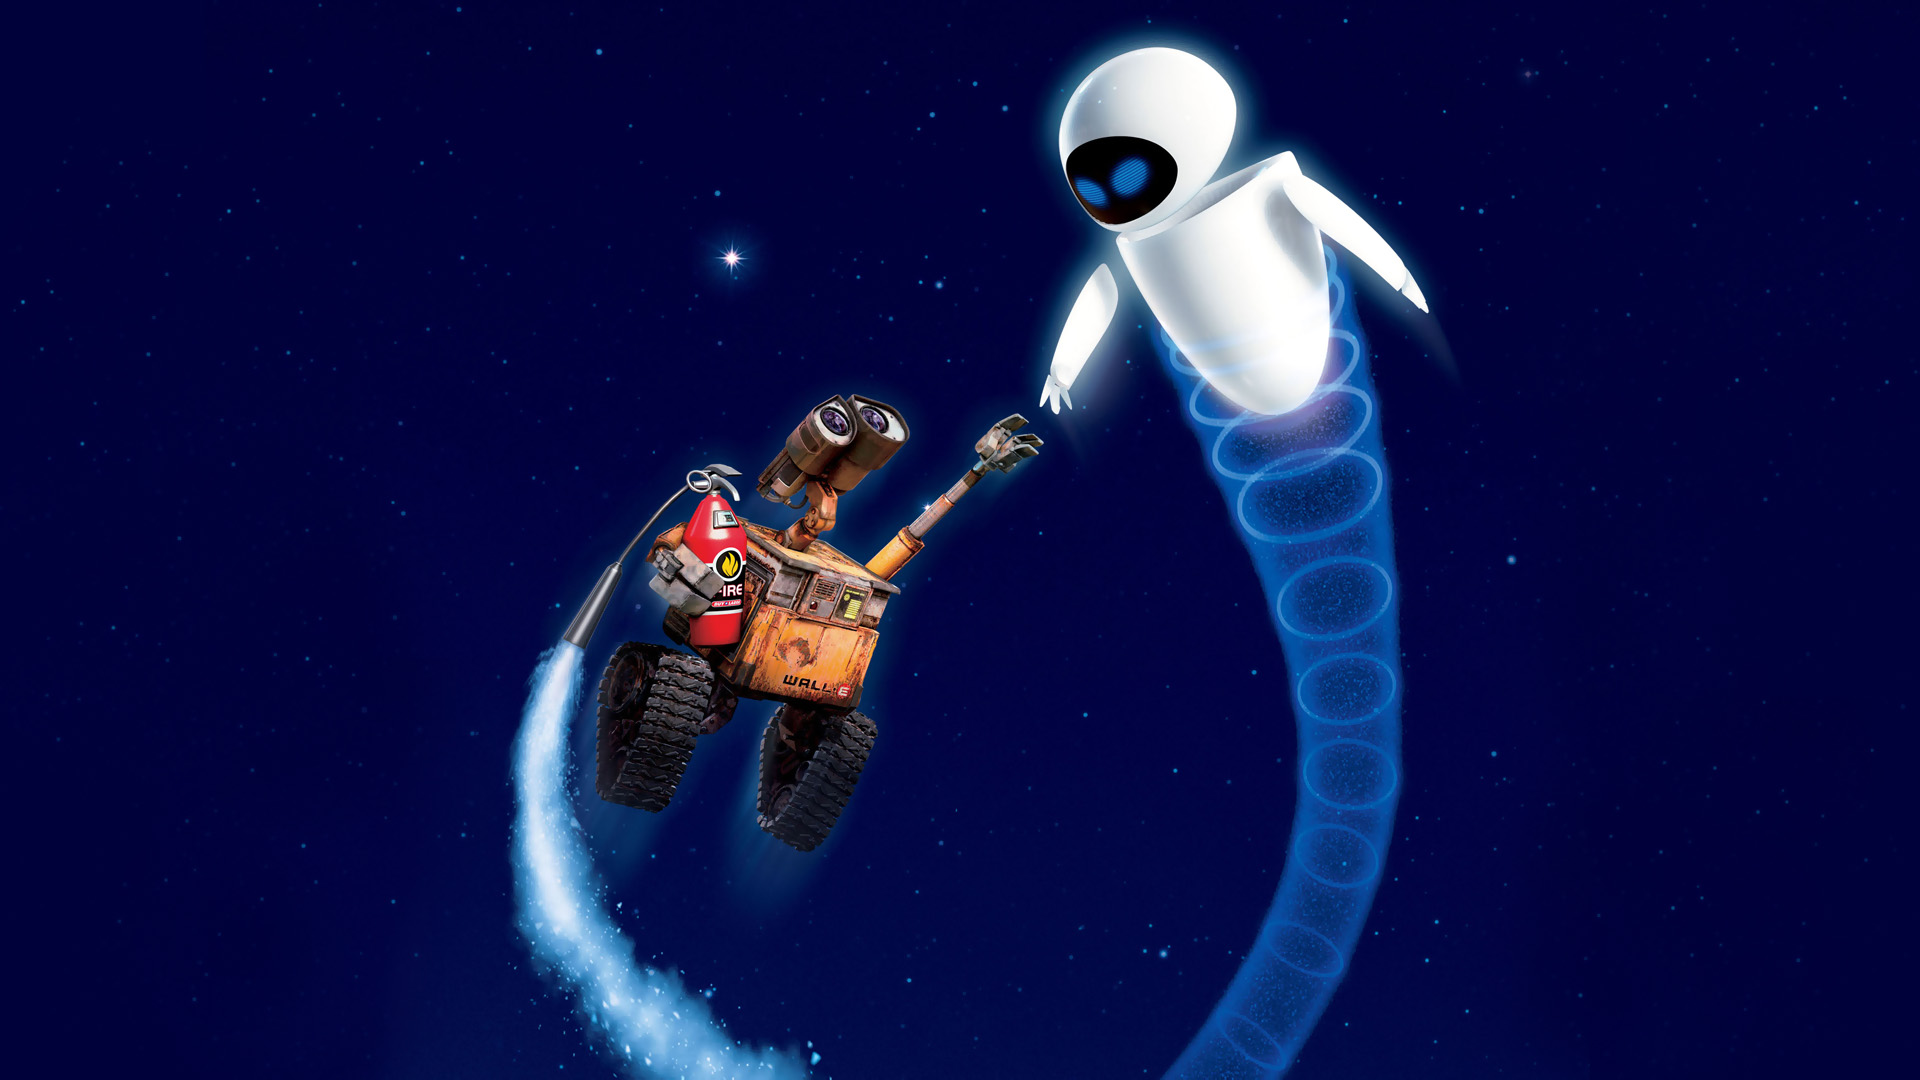 Wall E Wallpapers High Quality Download Free